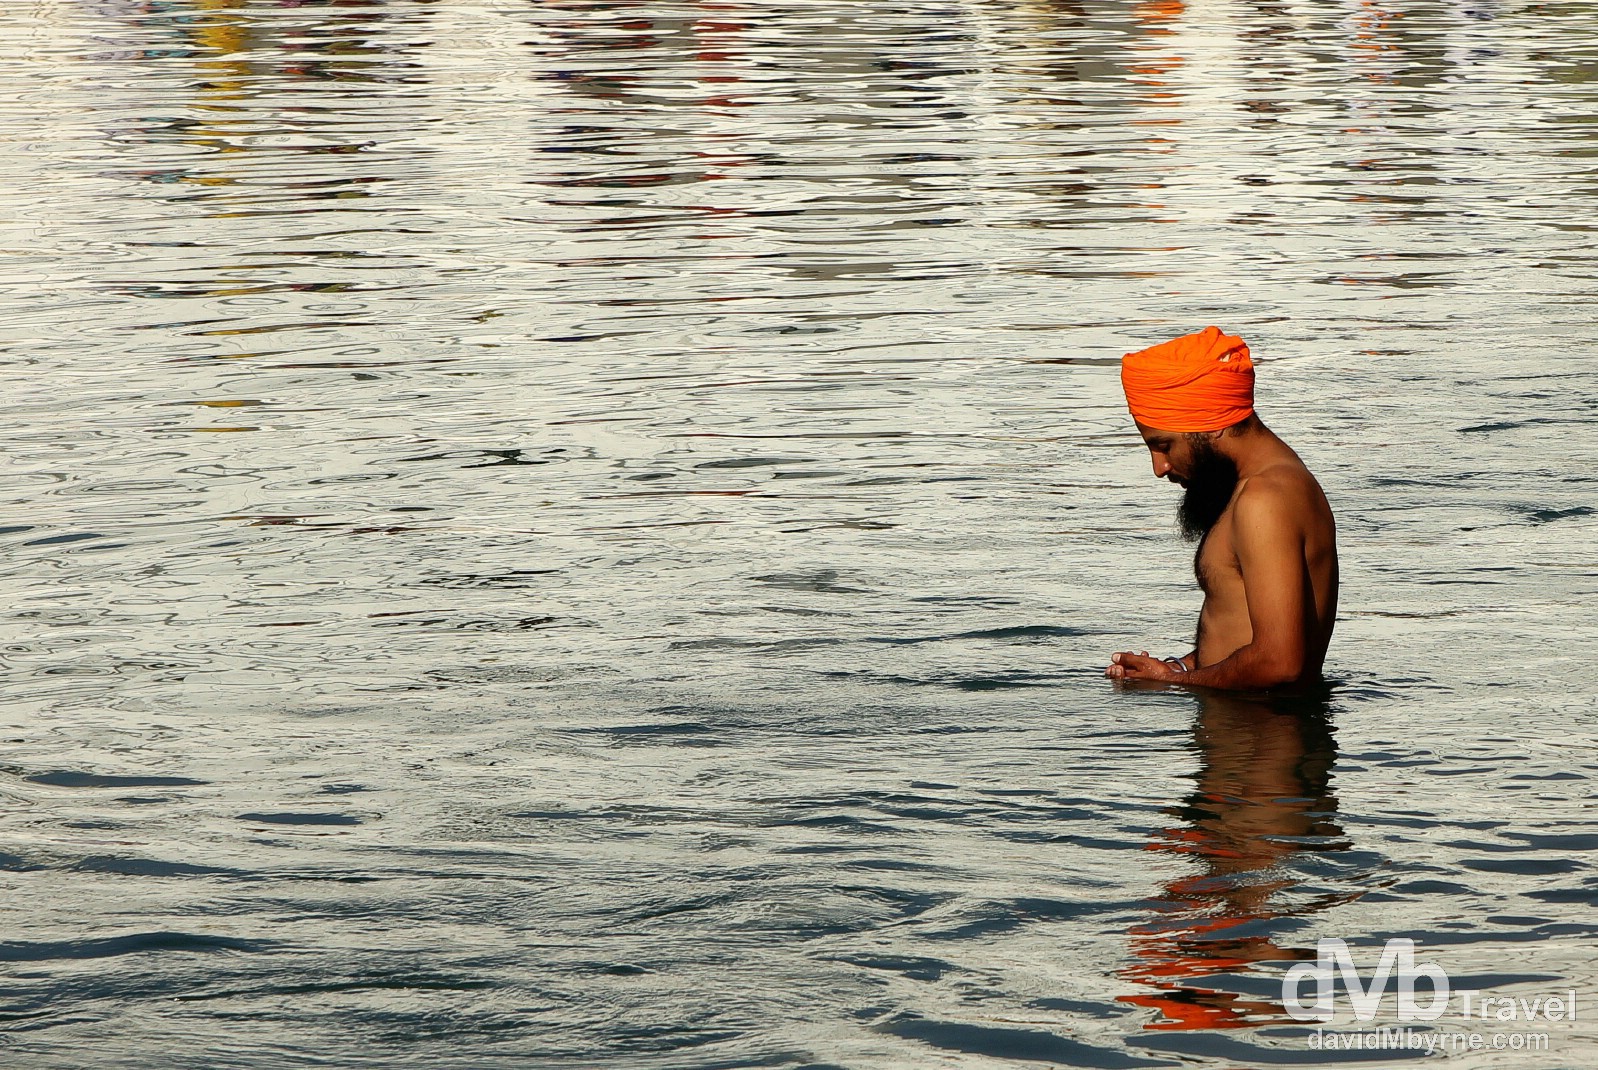 A Sikh devotee in the Amrit Sarovar (Pool of Nectar) in the Golden Temple complex, Amritsar, Punjab, India. October 9th 2012.